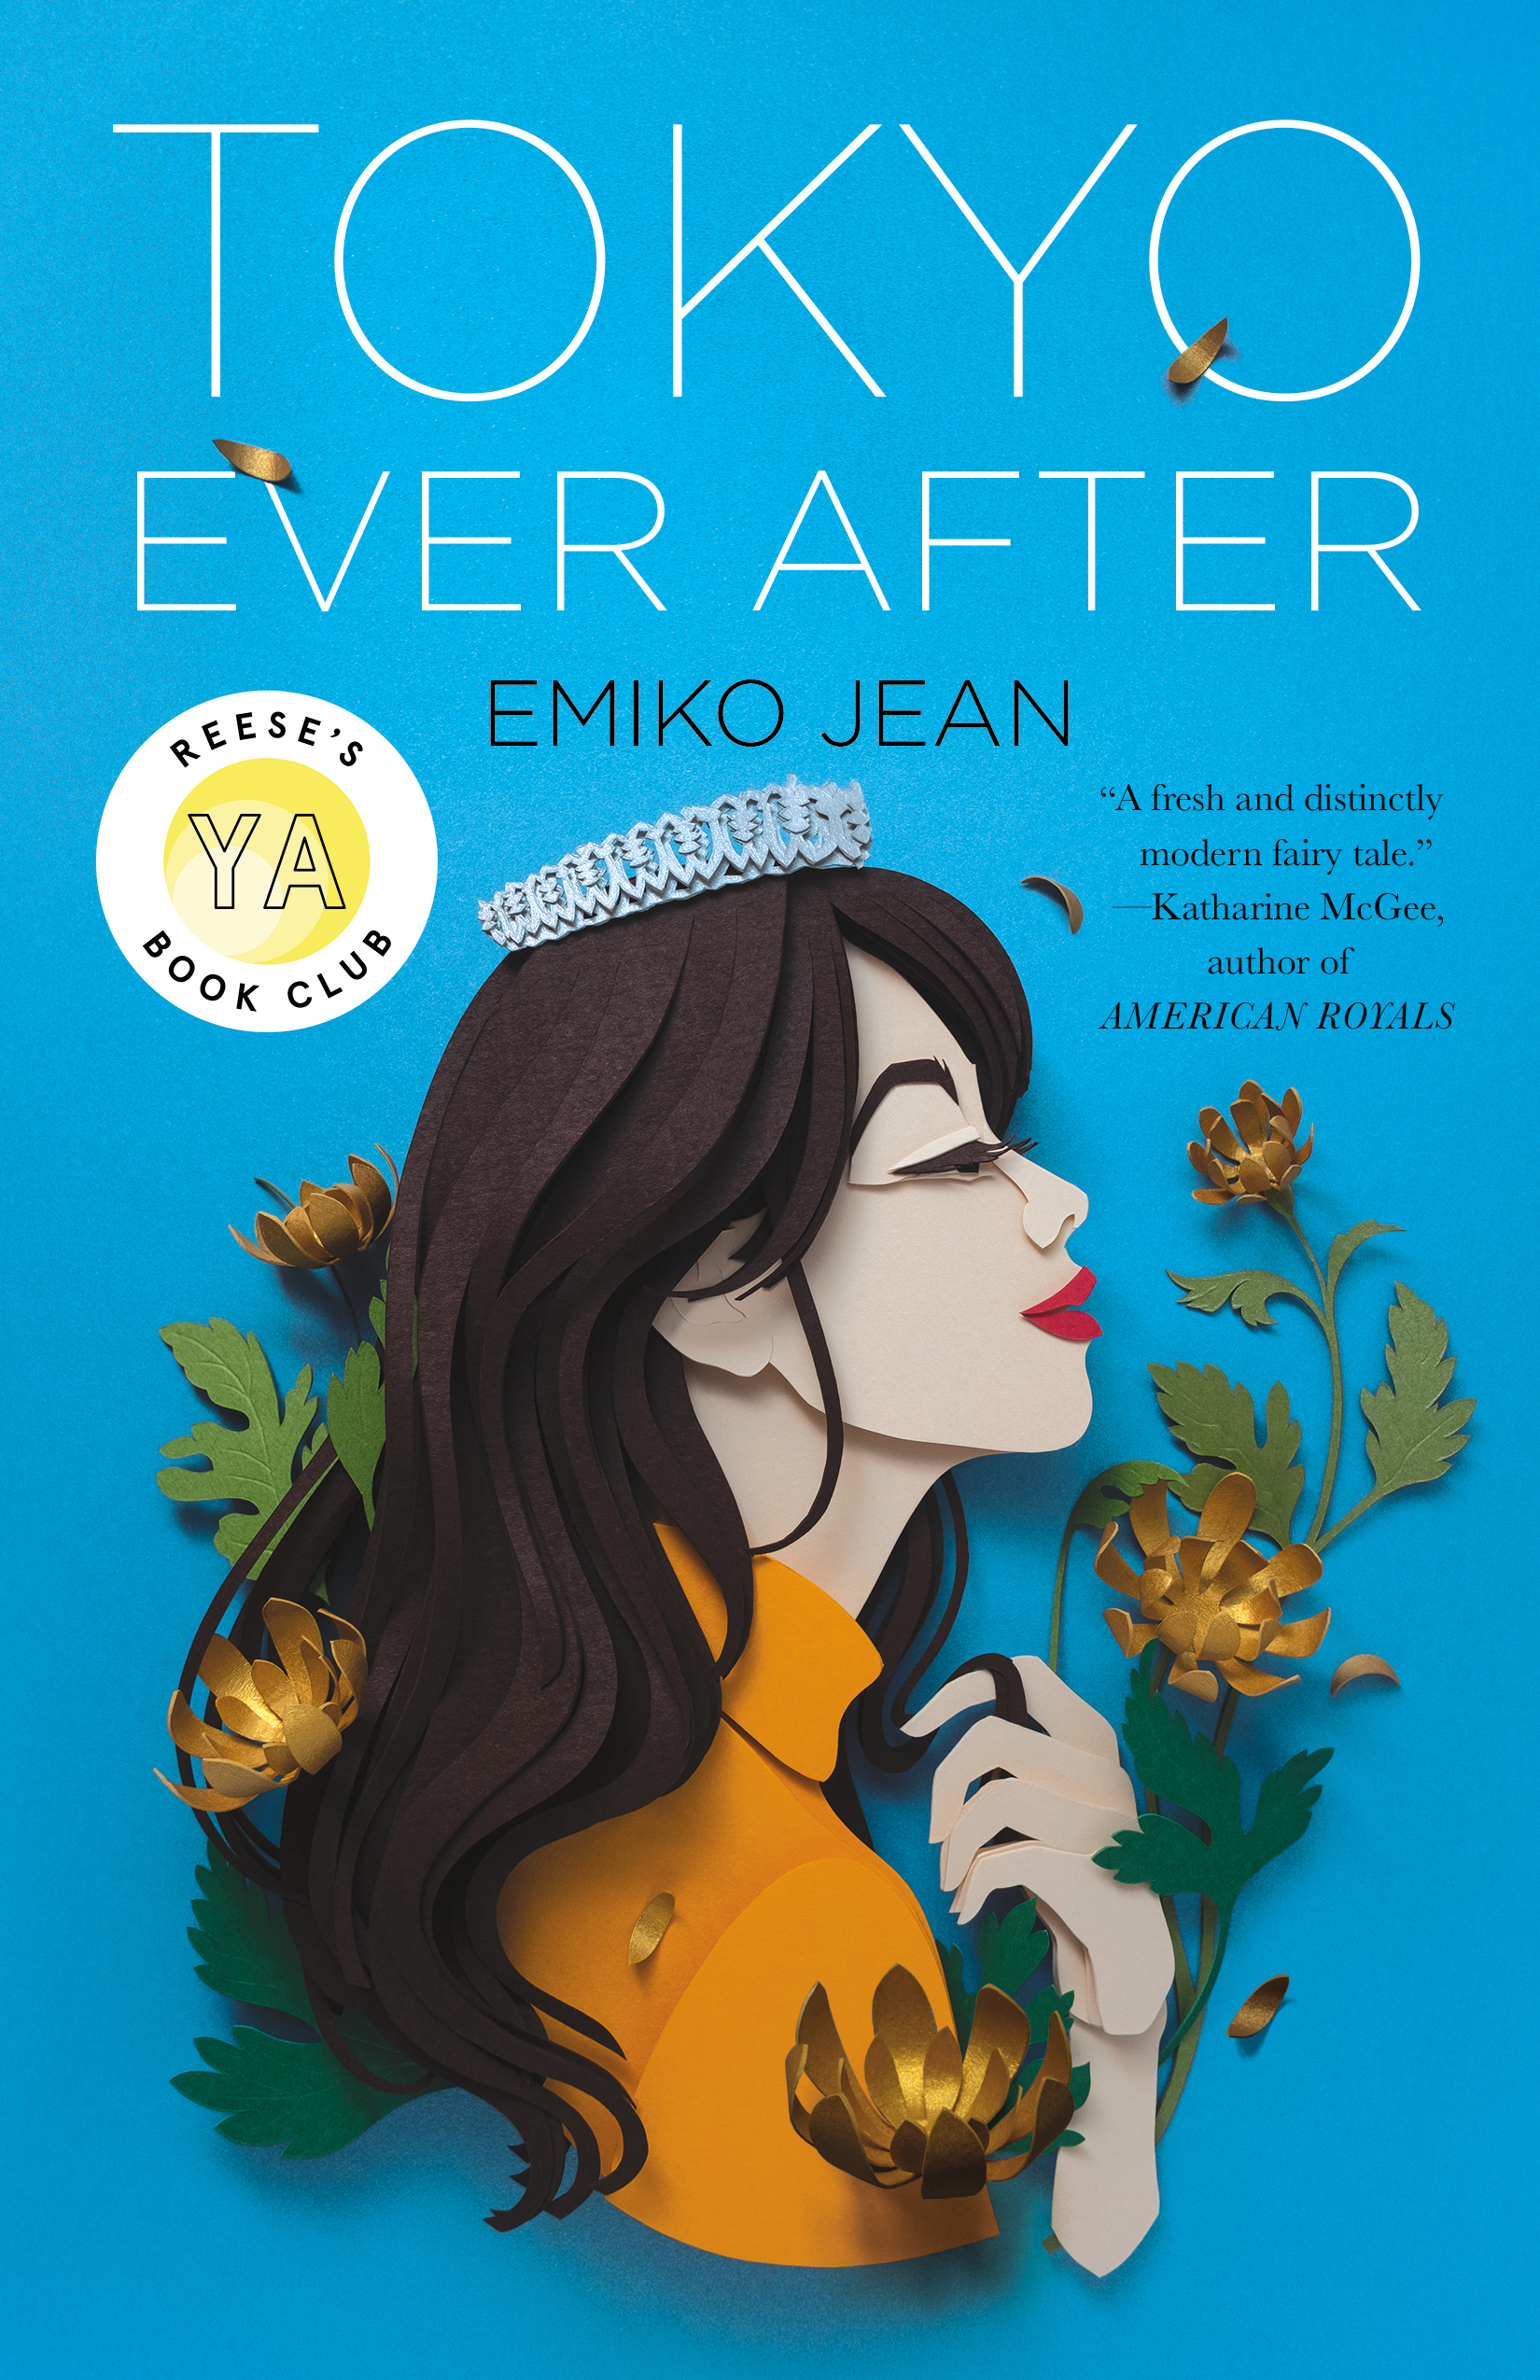 One of our recommended books is Tokyo Ever After by Emiko Jean